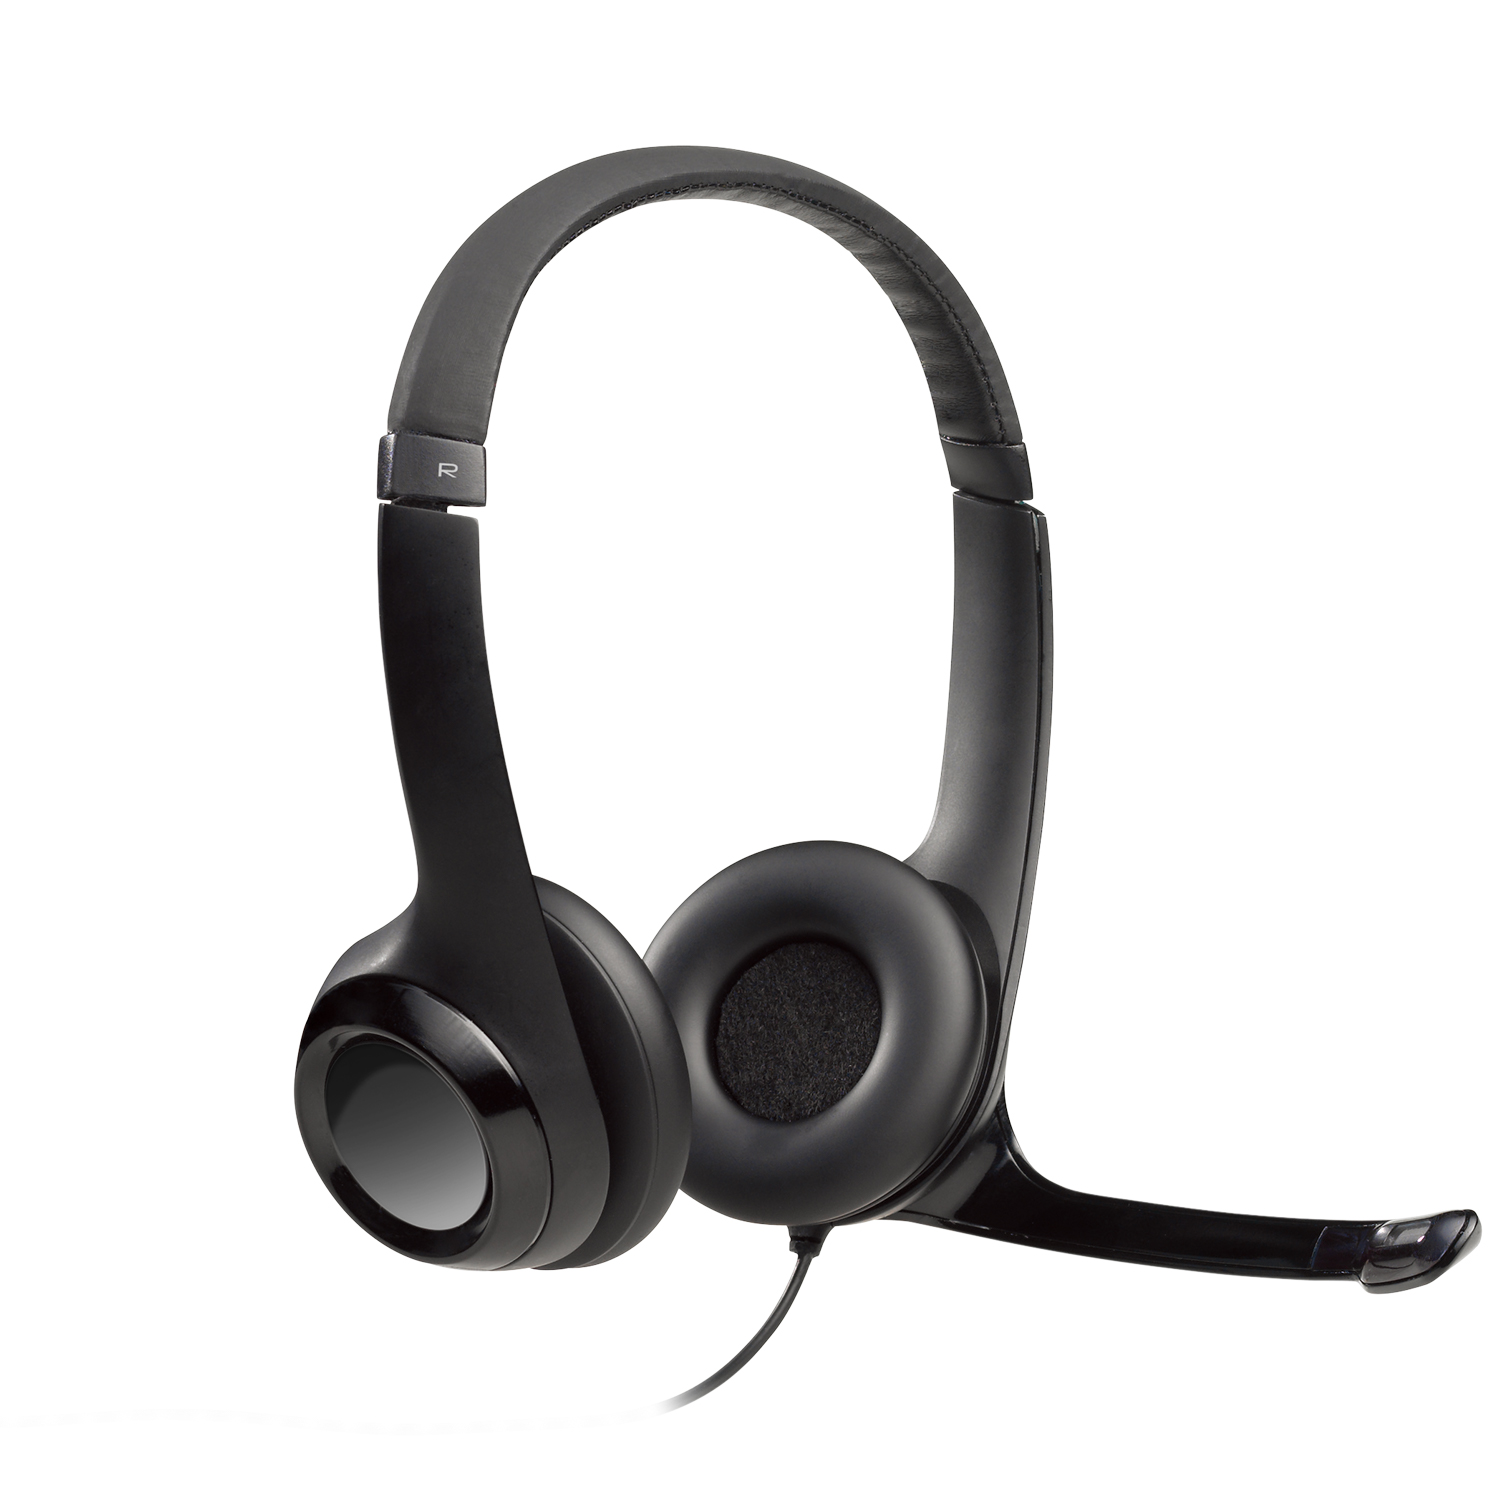 Logitech Wired USB Headset, Stereo Headphones with Noise-Cancelling Microphone, USB, In-Line Controls, PC/Mac/Laptop, Black (981-000310) - image 4 of 7